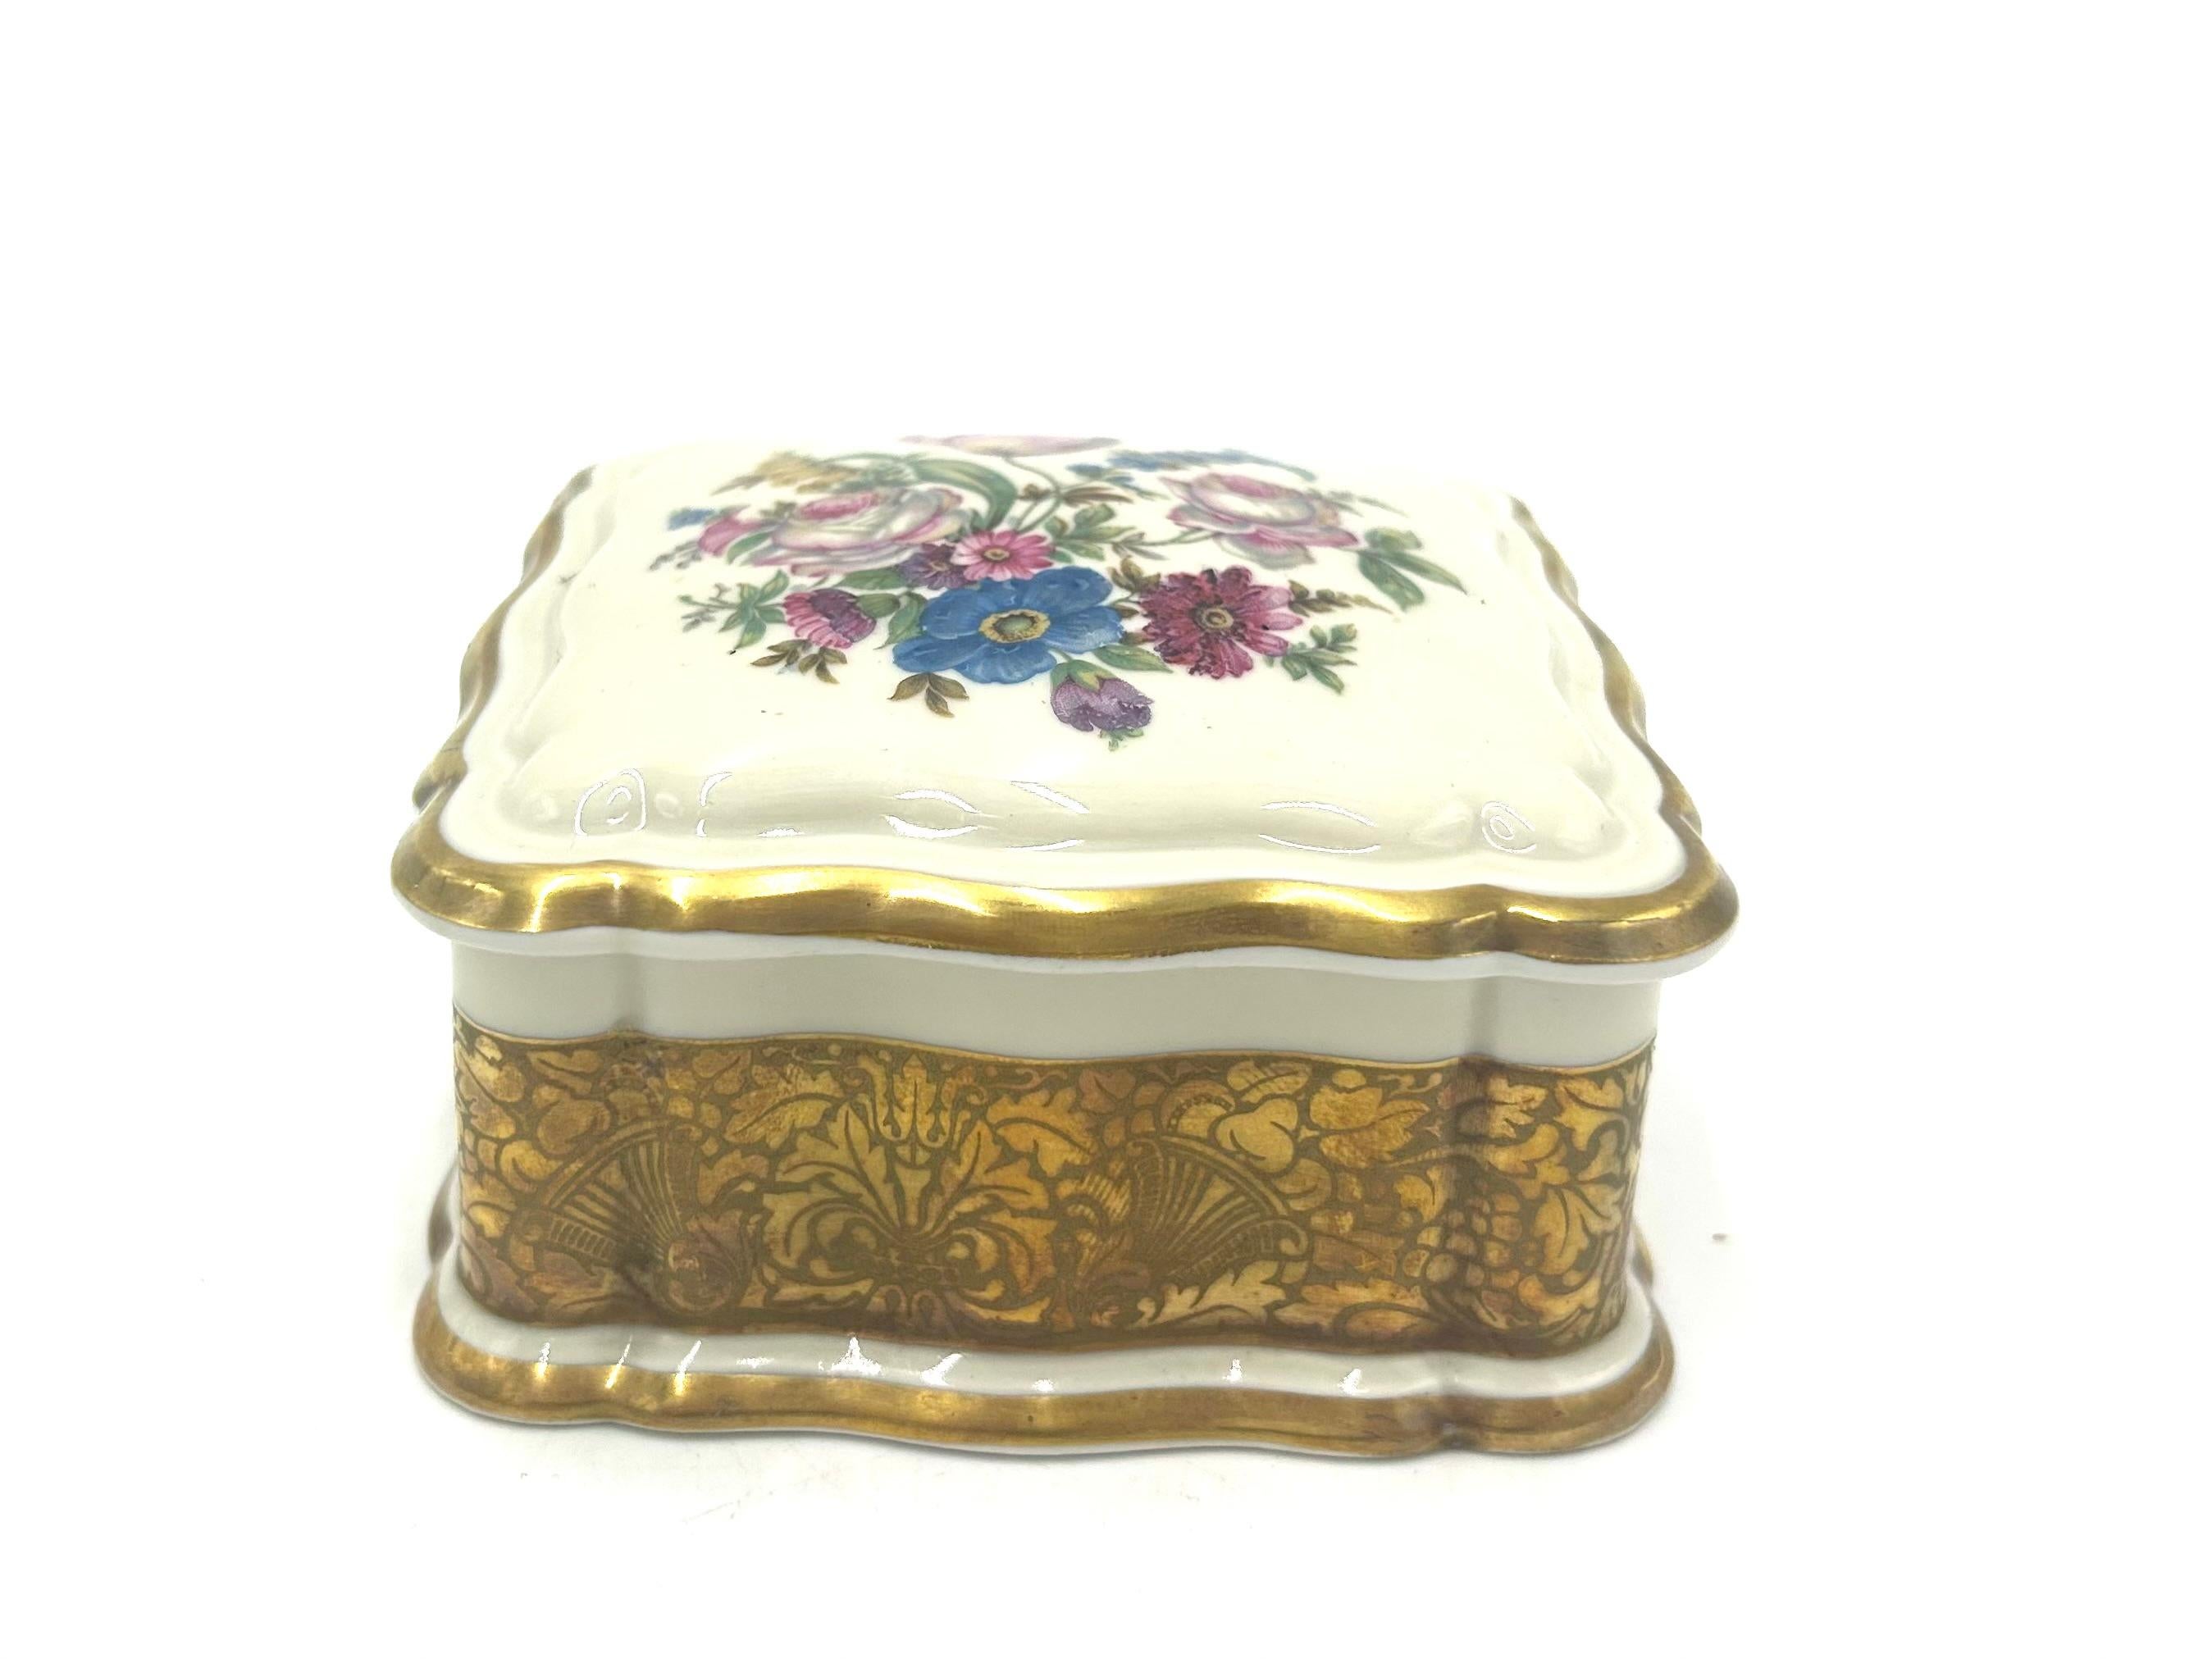 Porcelain casket - a box for jewelry and trinkets. Ivory-colored porcelain decorated with gilding and a floral bouquet motif. A product of the renowned German manufacturer Rosenthal. Chippendale series. Very good condition, no damage.

height 5cm